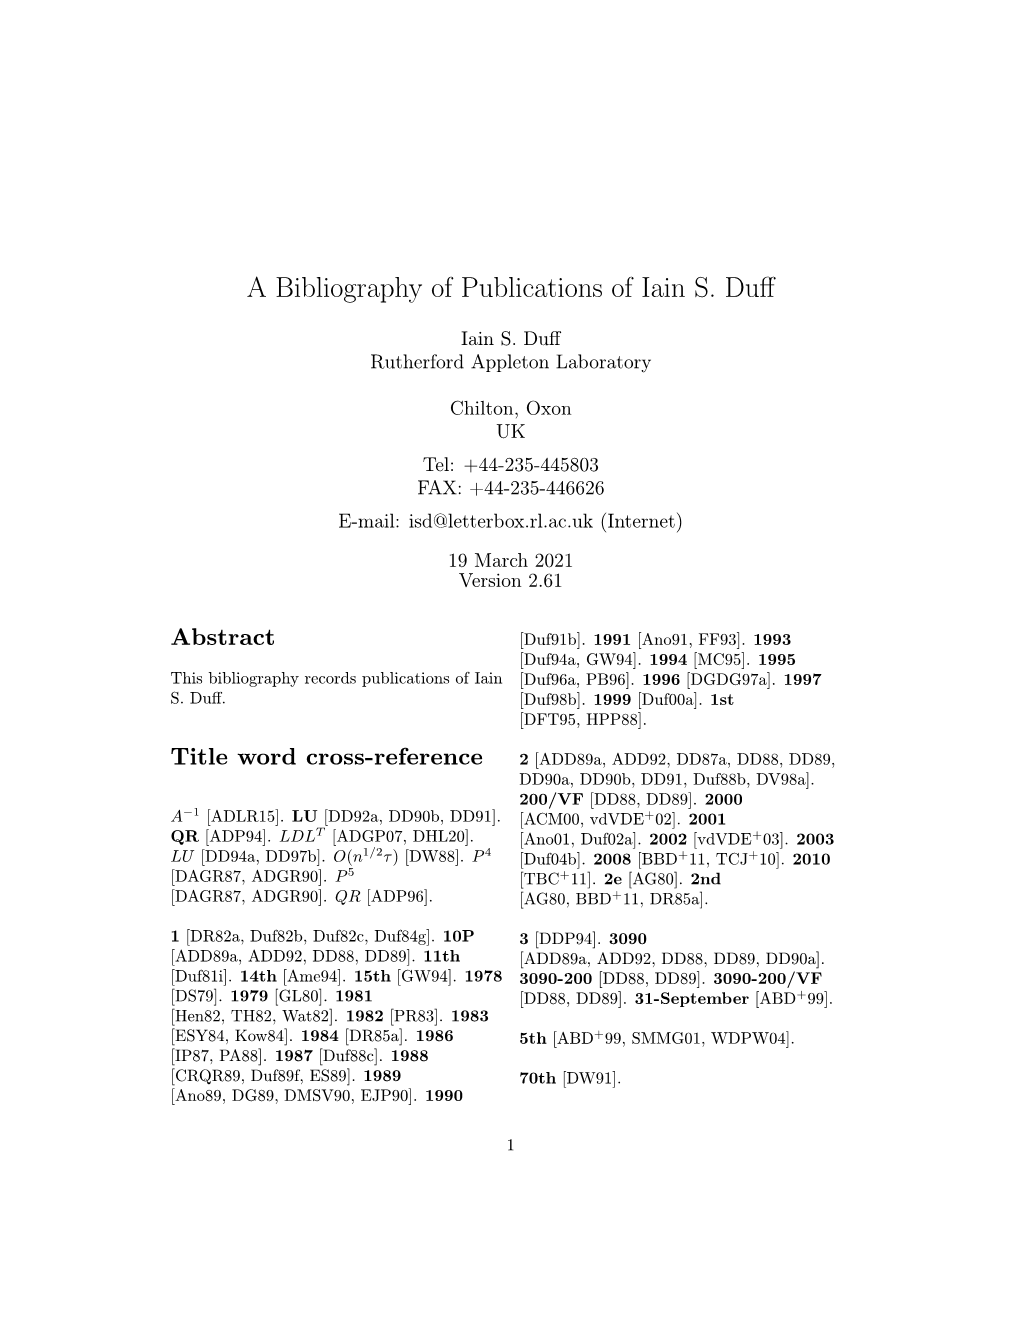 A Bibliography of Publications of Iain S. Duff